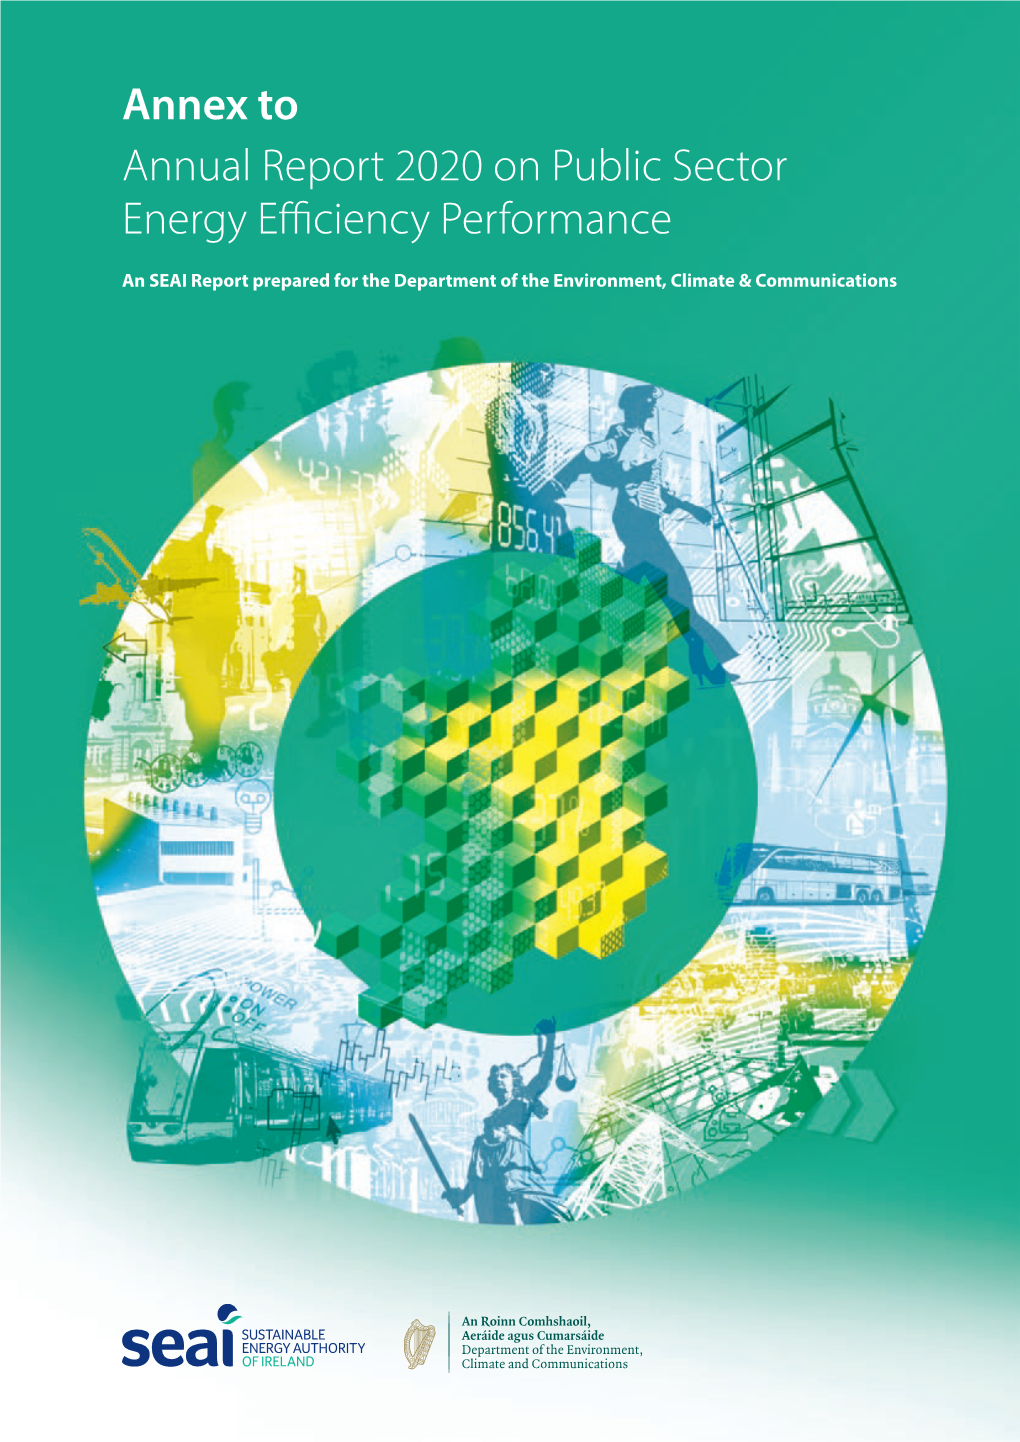 Annex to Annual Report 2020 on Public Sector Energy Efficiency Performance